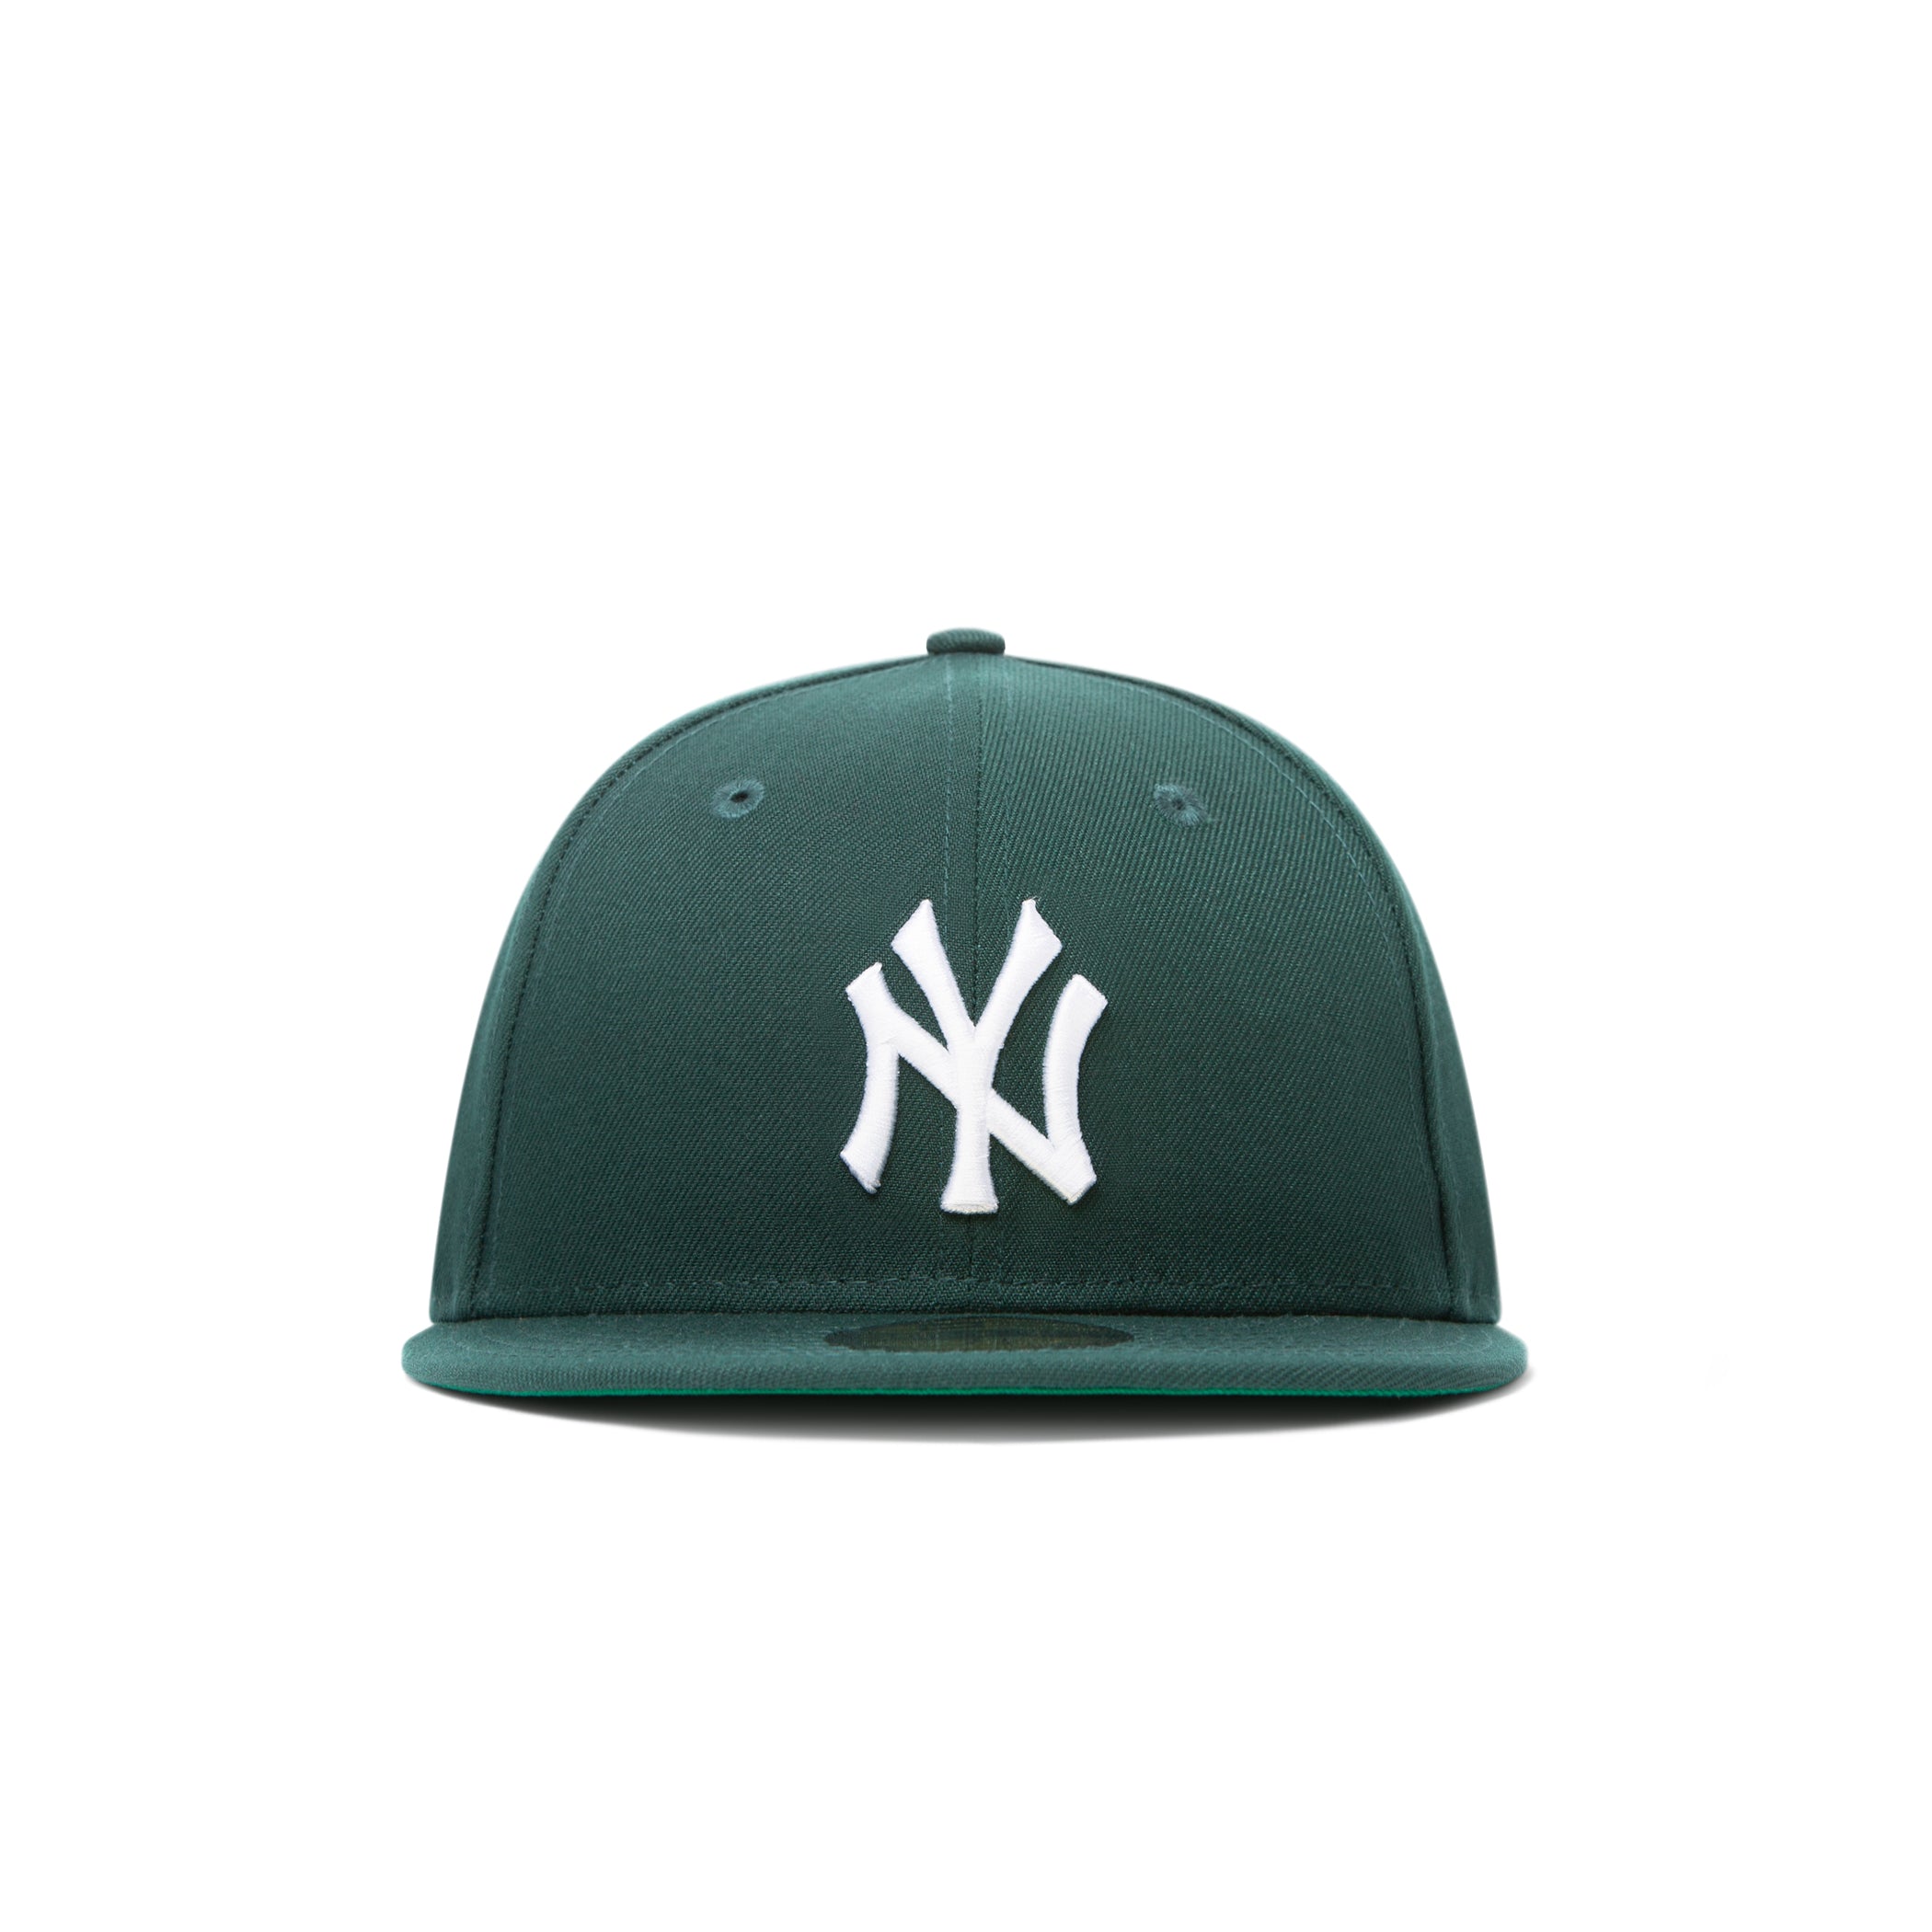 Psychworld New Era NY 59Fifty Fitted Hat Green Men's - FW21 - US